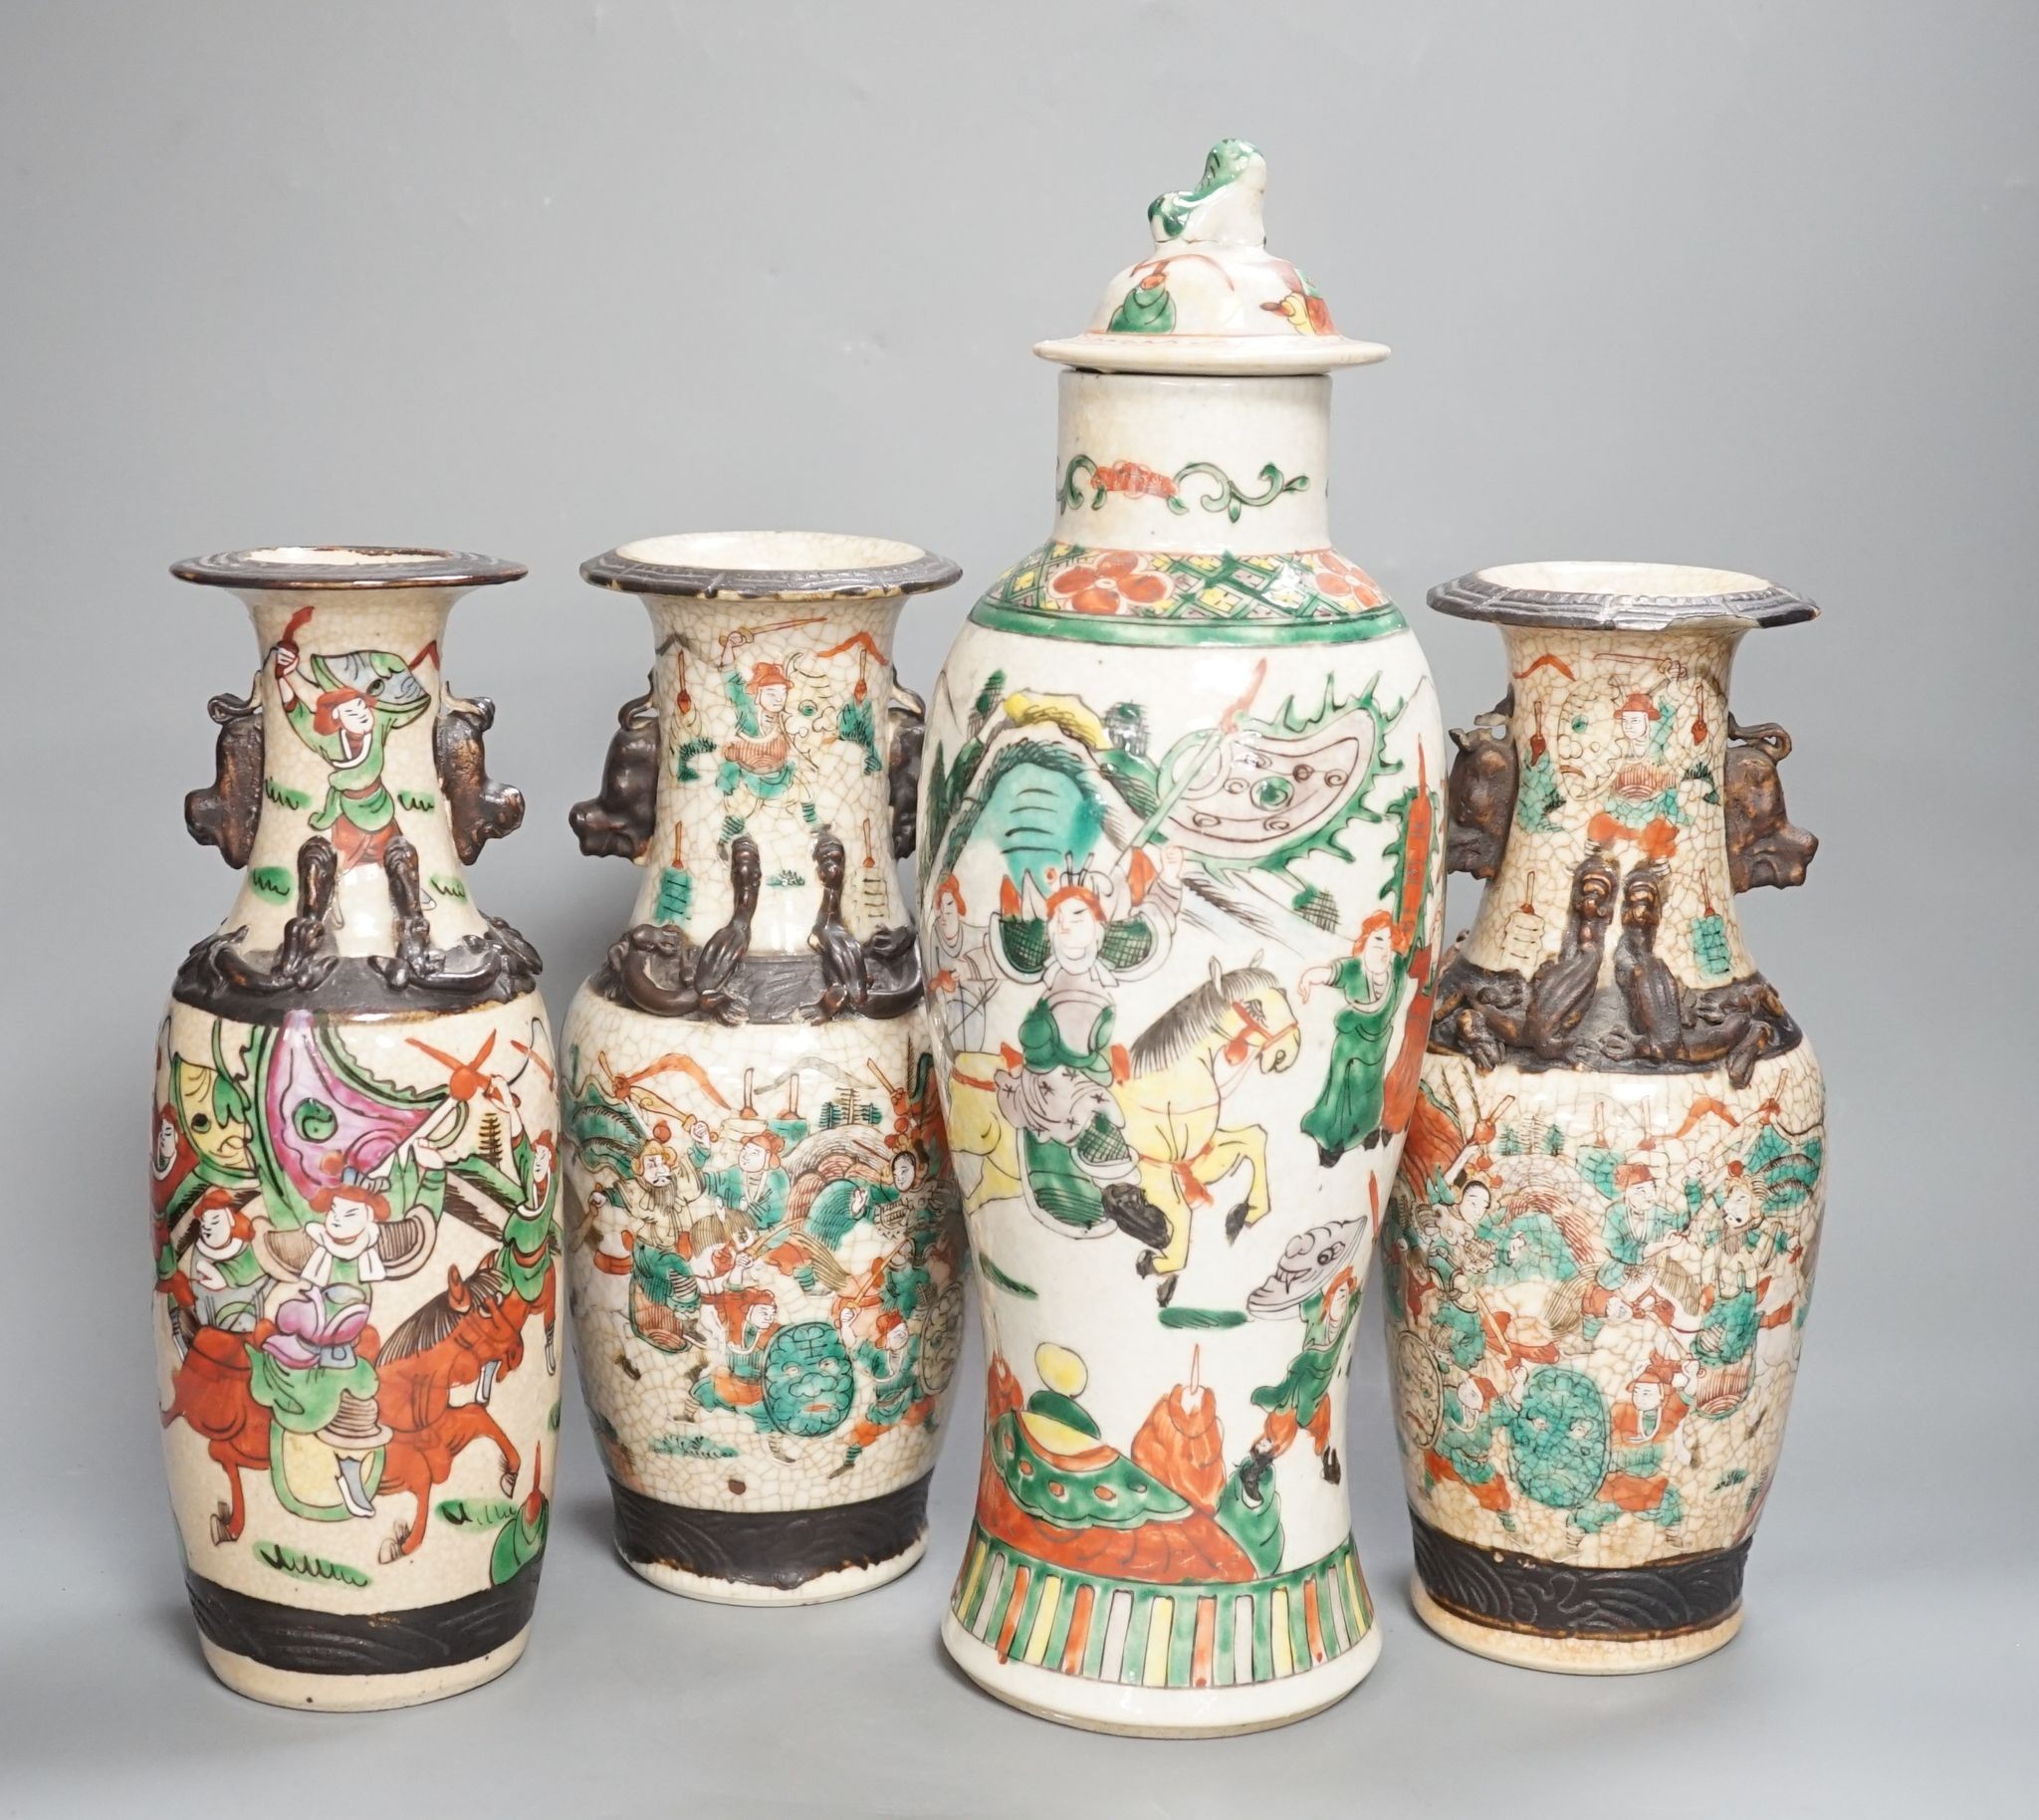 A pair of Chinese crackle glaze vases, a similar vase and cover, and another, late 19th/early 20th century (4), tallest 29 cms high.